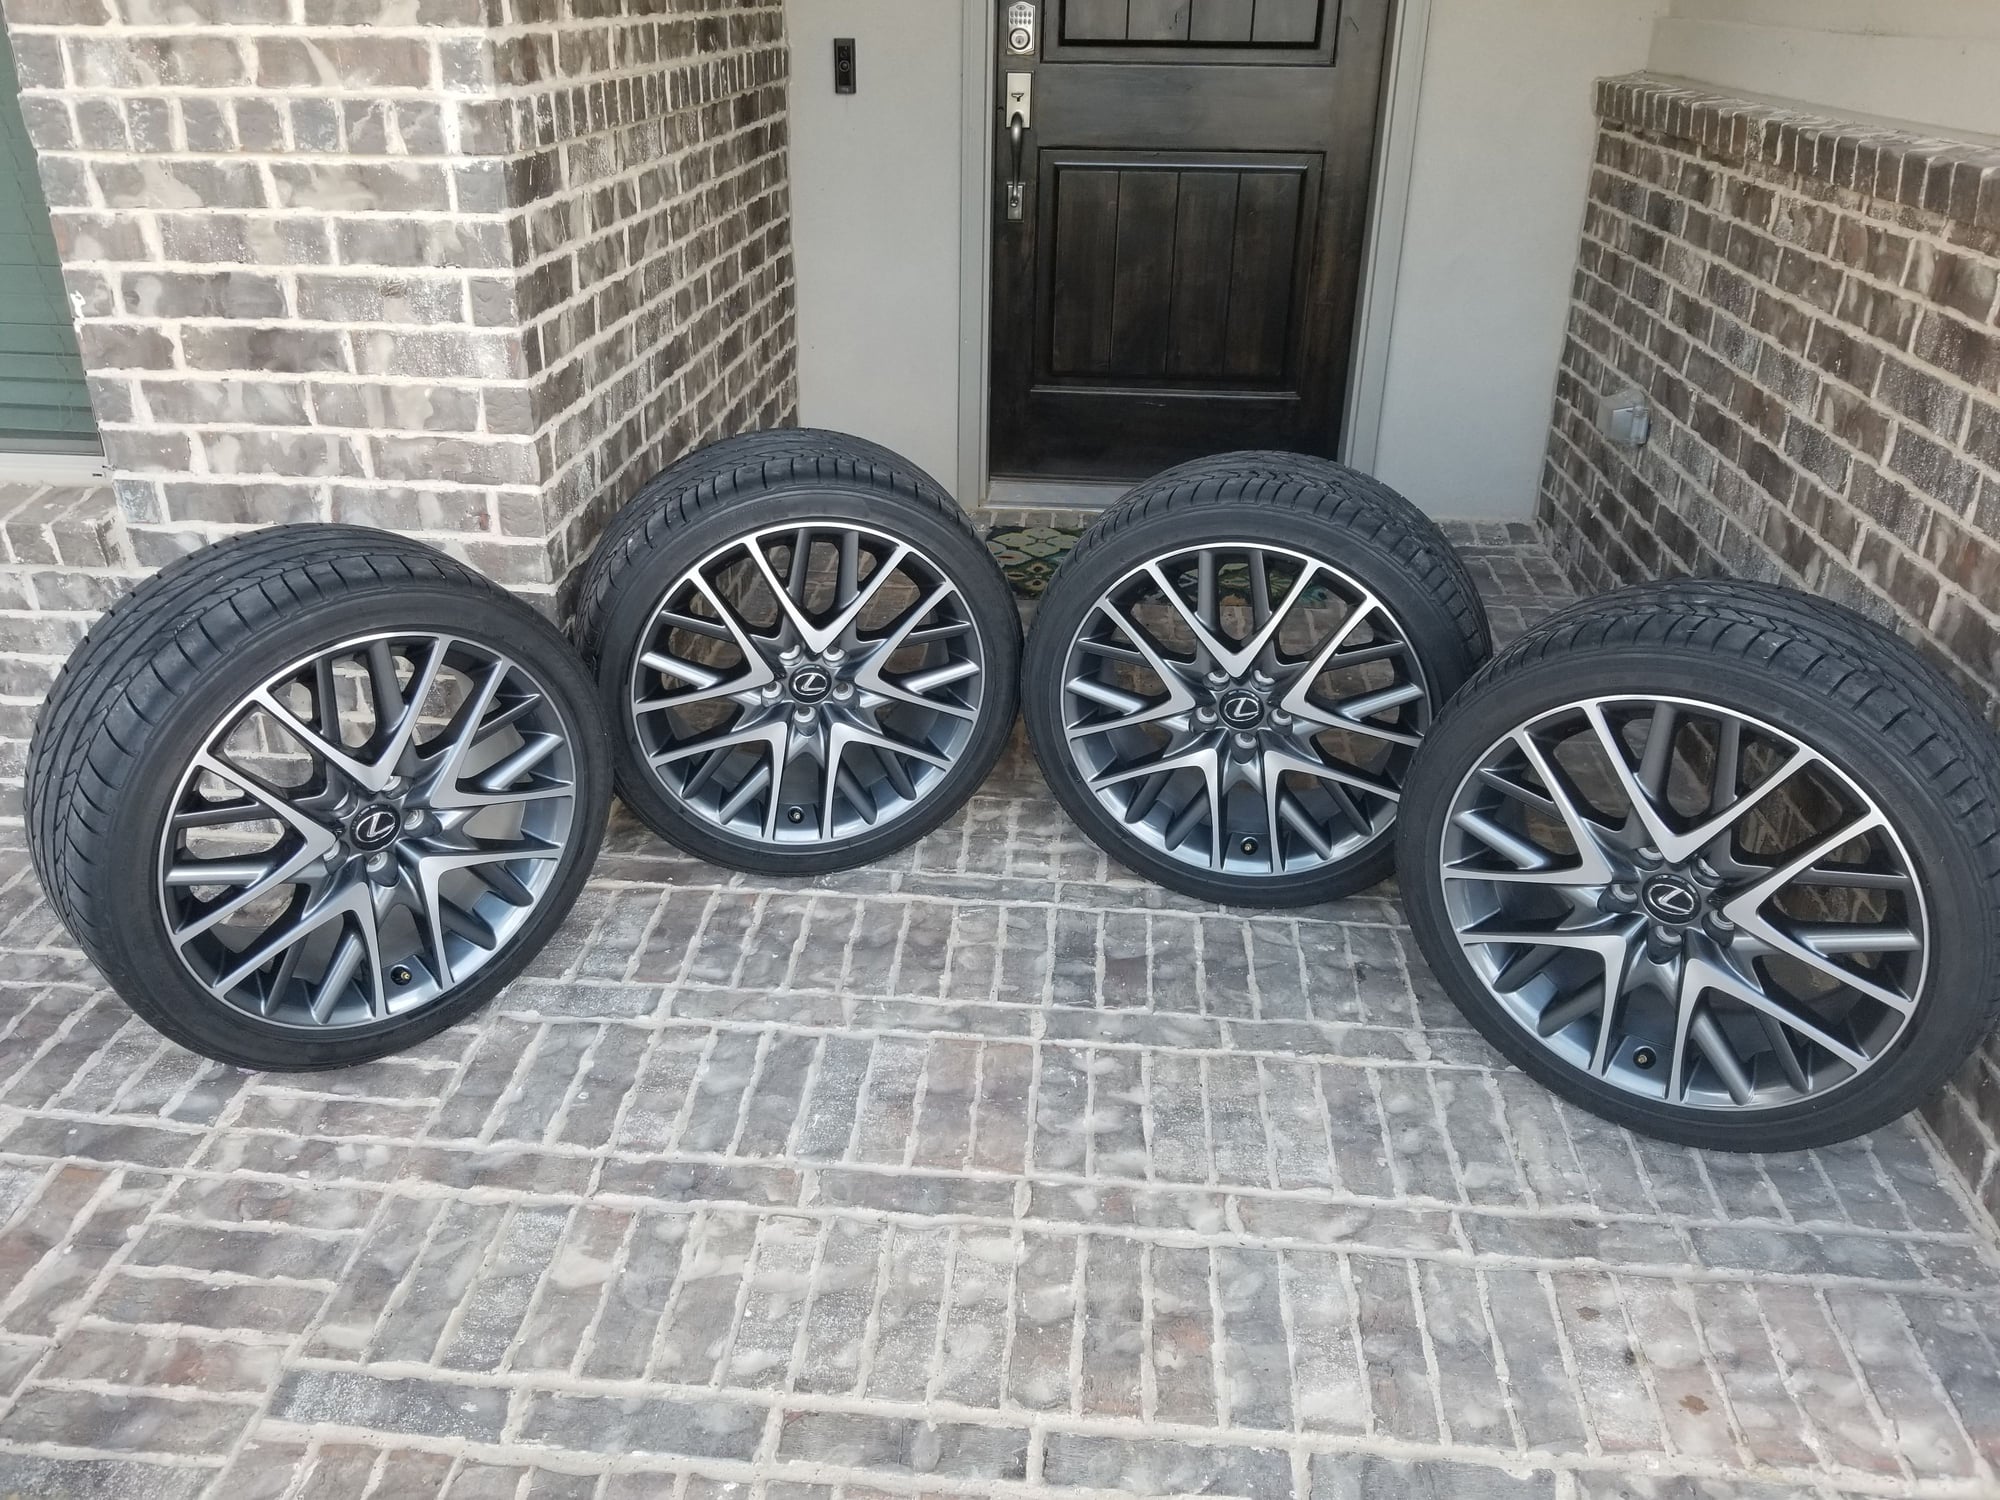 Wheels and Tires/Axles - Factory Lexus RC wheels and tires - Excellent condition - Used - 2015 to 2018 Lexus RC350 - 2016 to 2018 Lexus RC300 - 2016 to 2018 Lexus RC200t - Argyle, TX 76226, United States